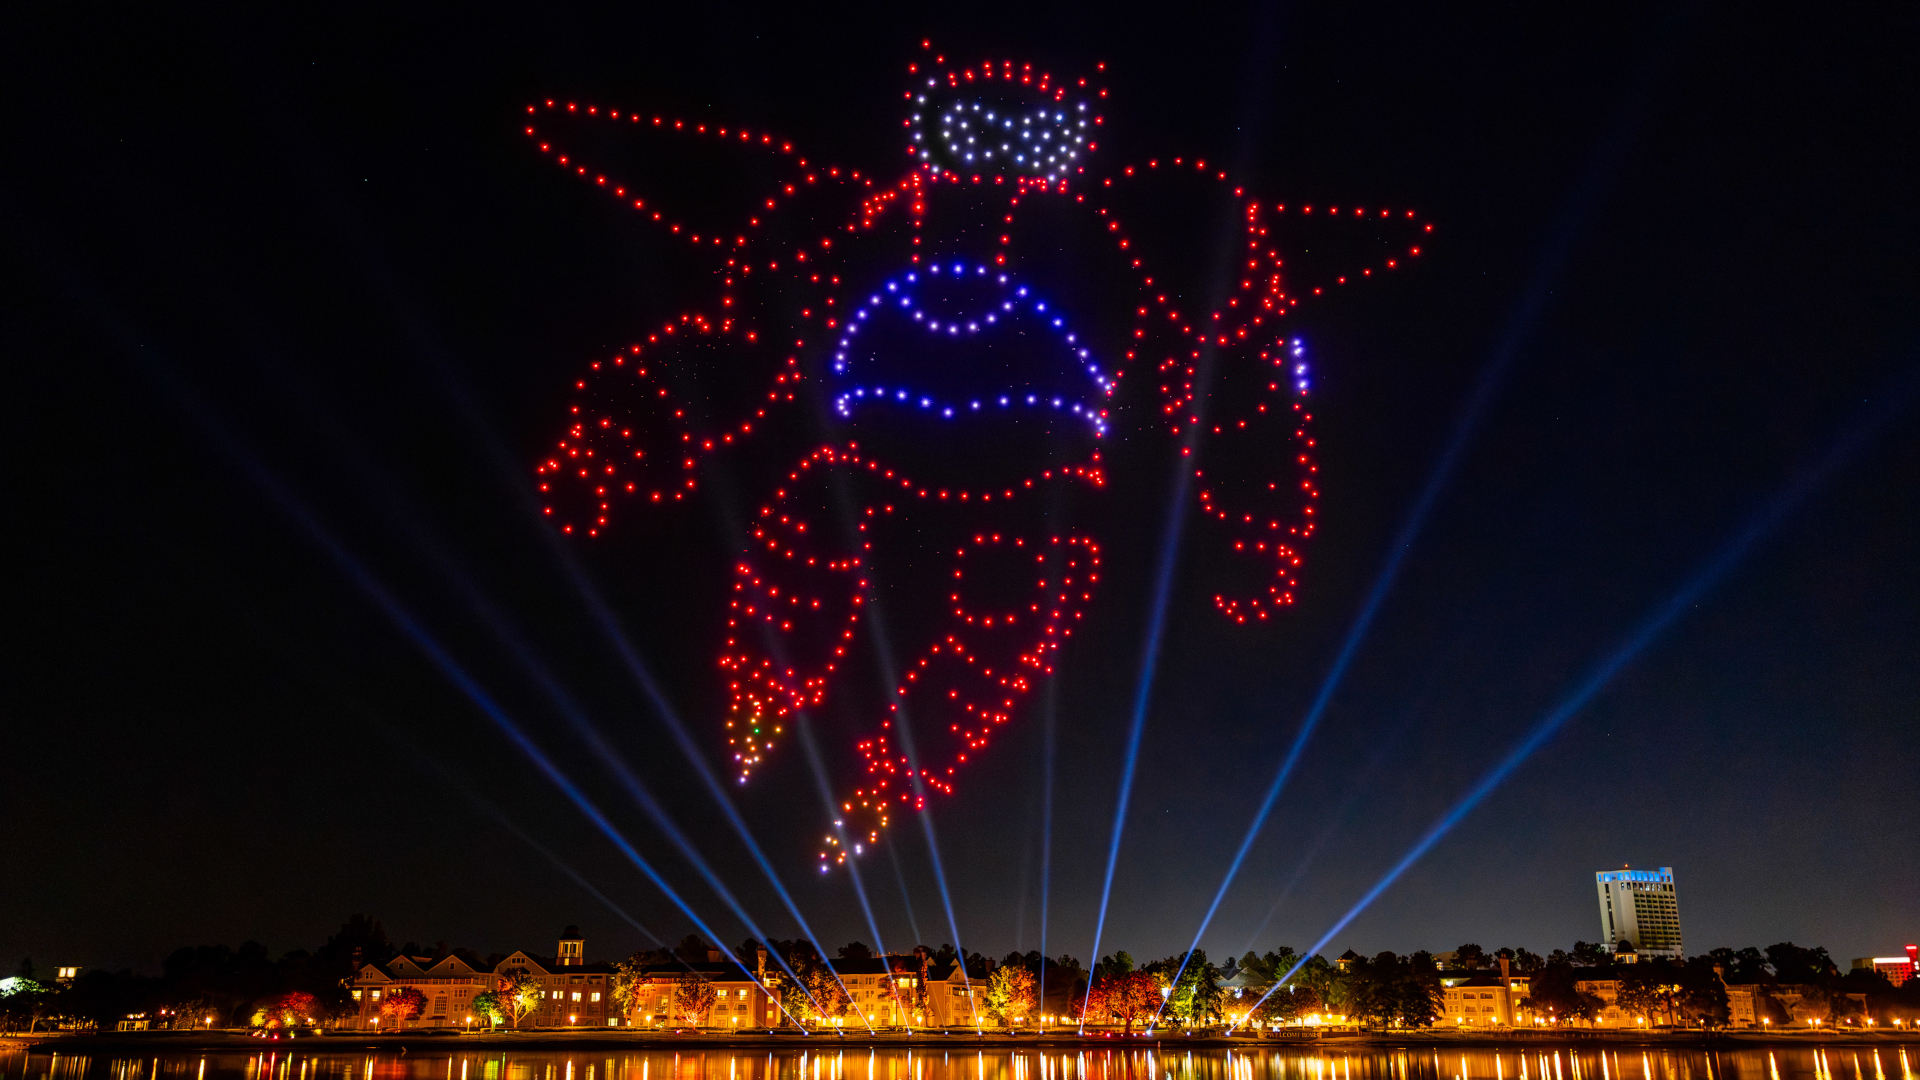  Disney 'Dreams That Soar' drone show lights up sky with Star Wars, Marvel and more sci-fi favorites 